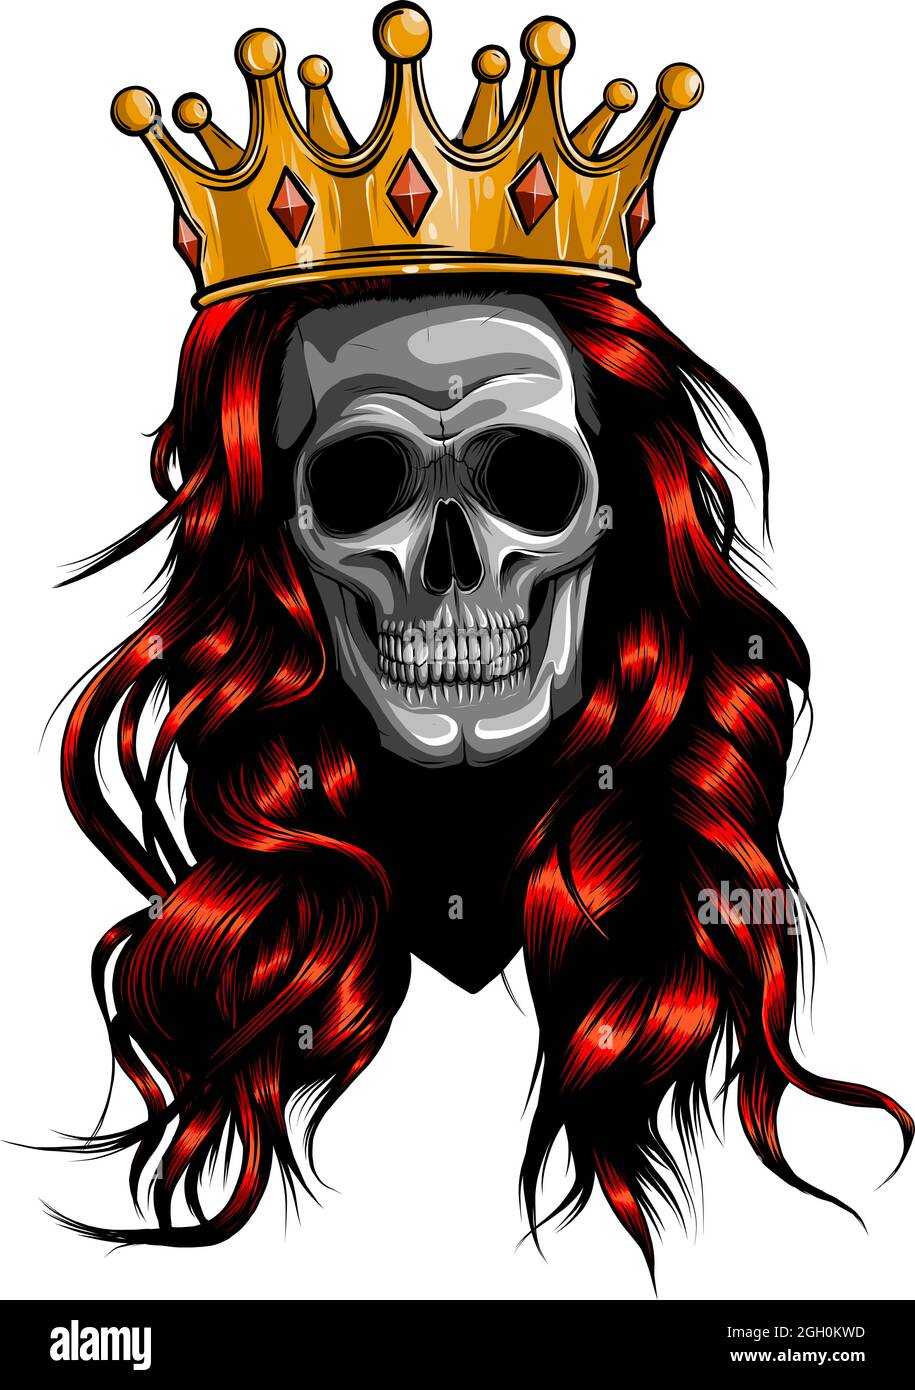 Skull with a King crown. Vector illustration. Stock Vector